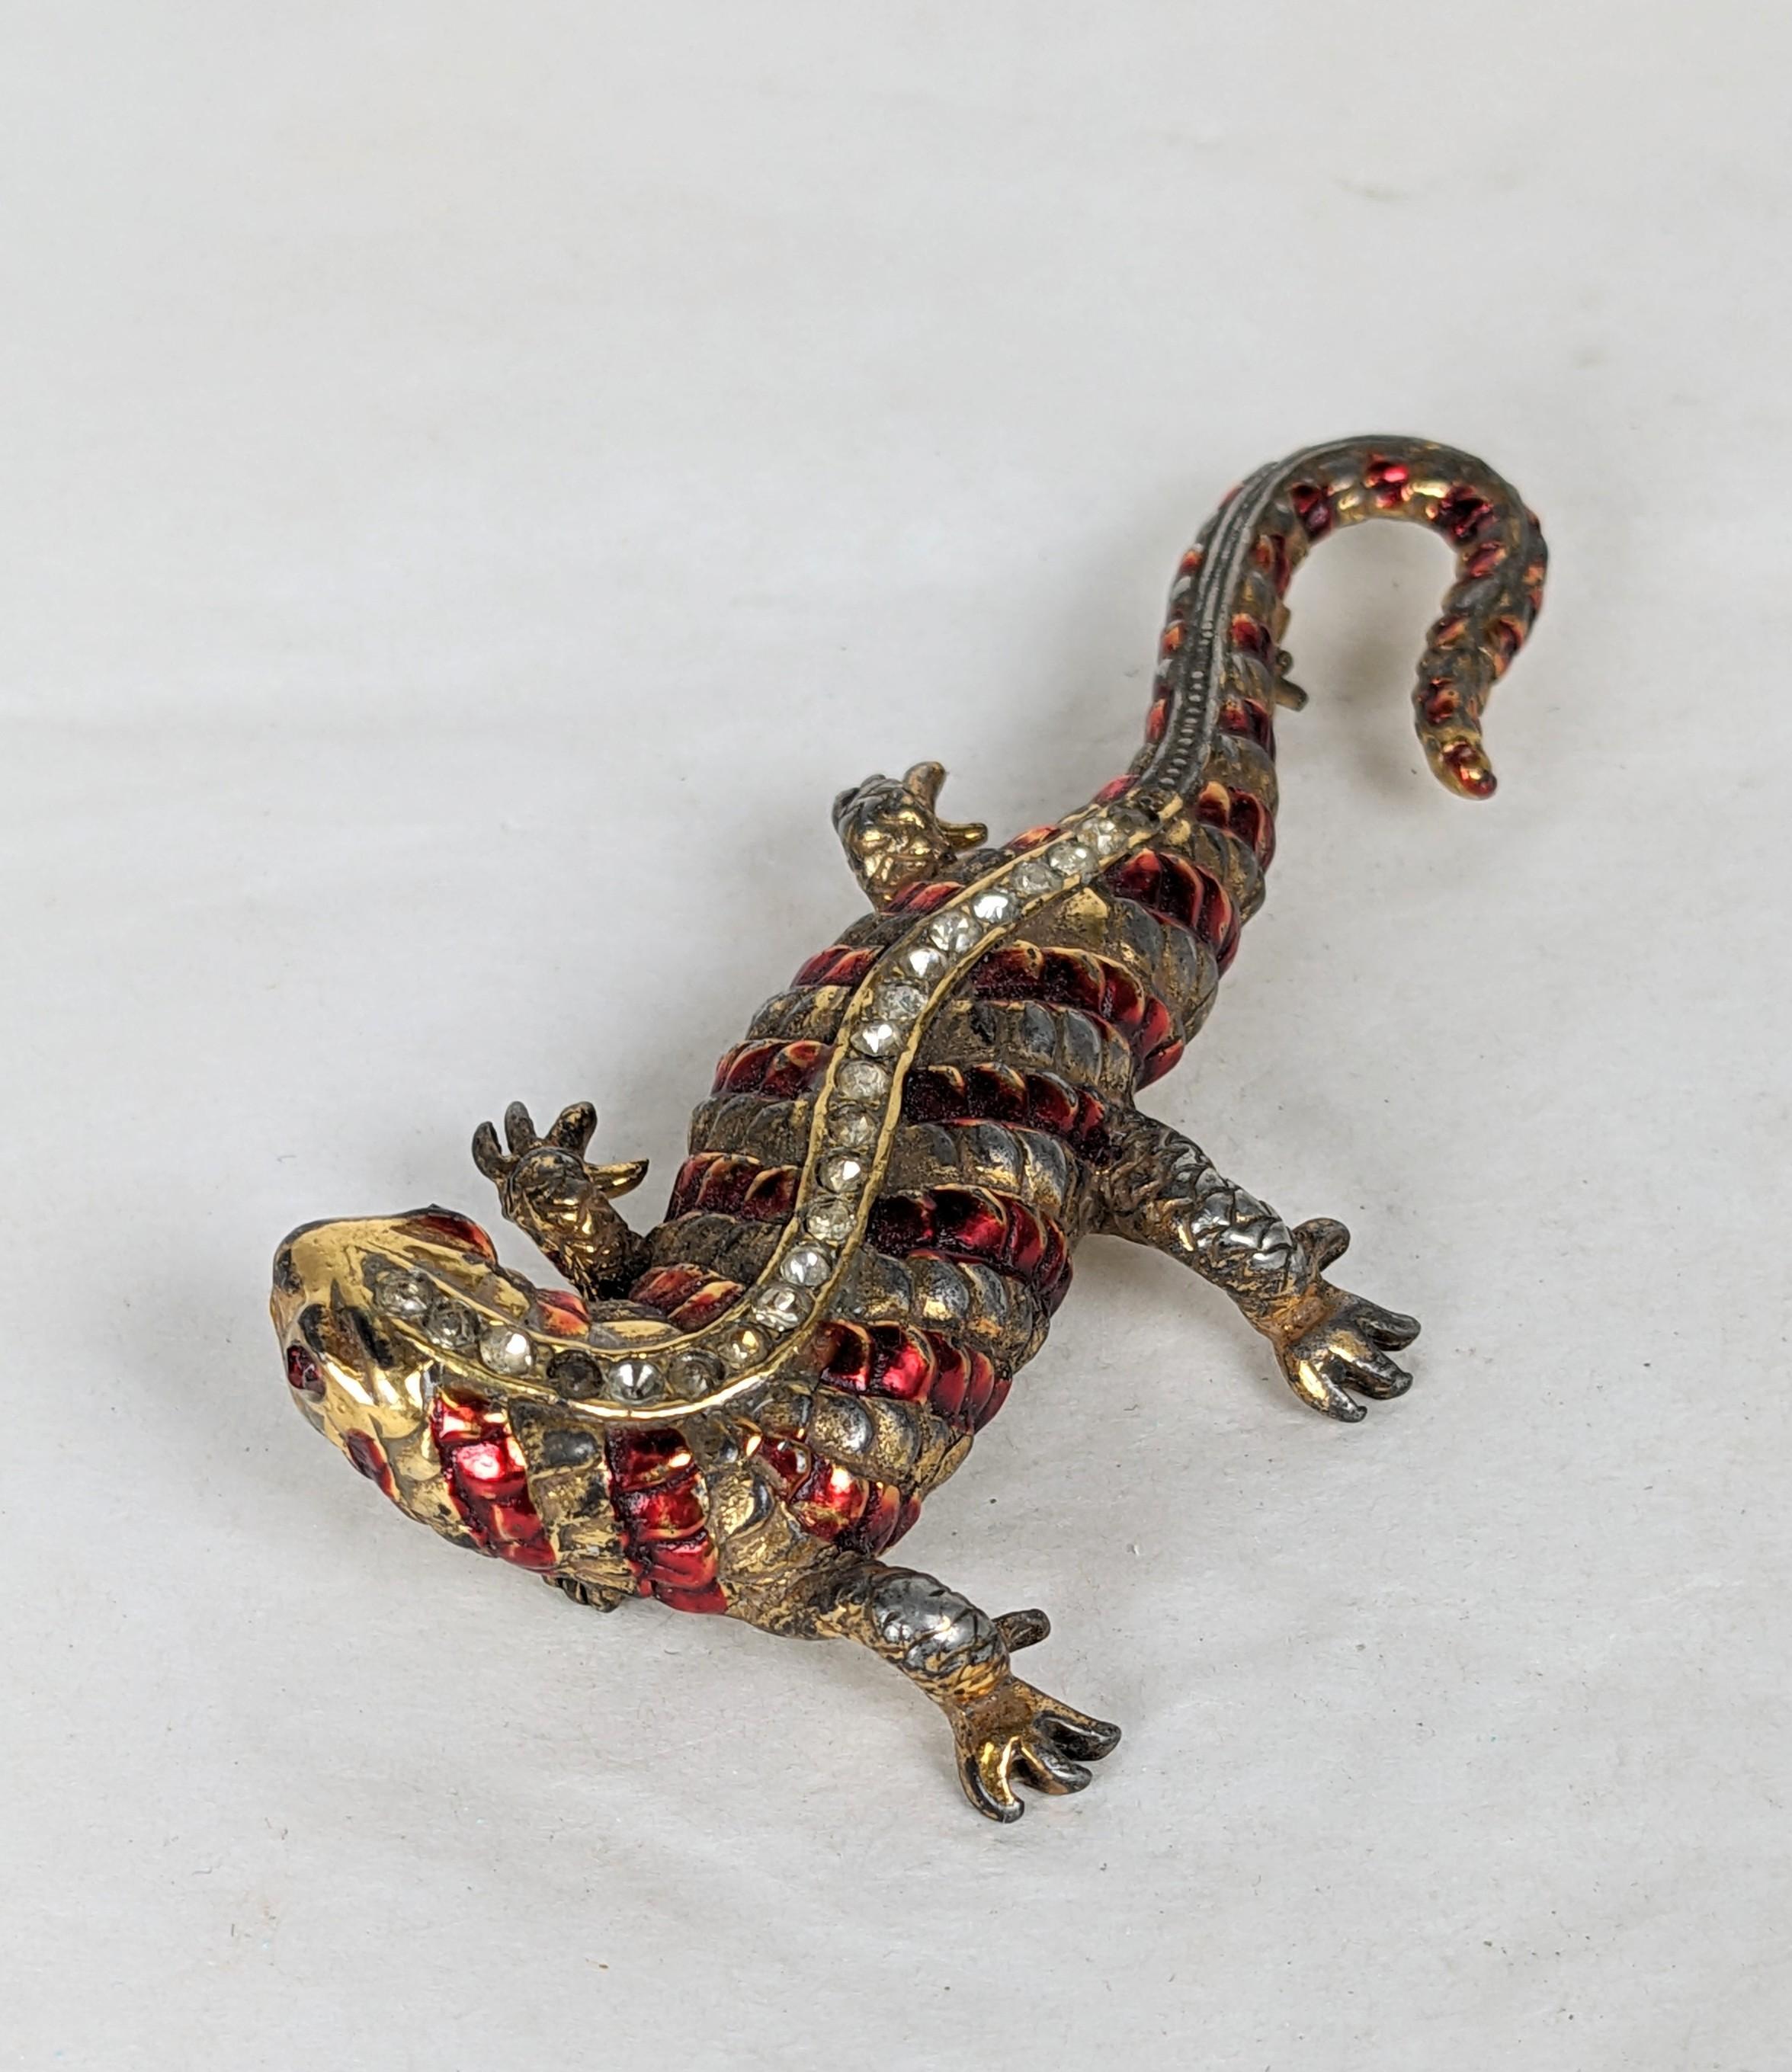 Charming Art Deco Enamel Salamander Brooch from the 1930's. Gilt metal with Marcel Boucher style pearlized enamel with pave accents down back. Red paste eyes. 1930's USA. 3